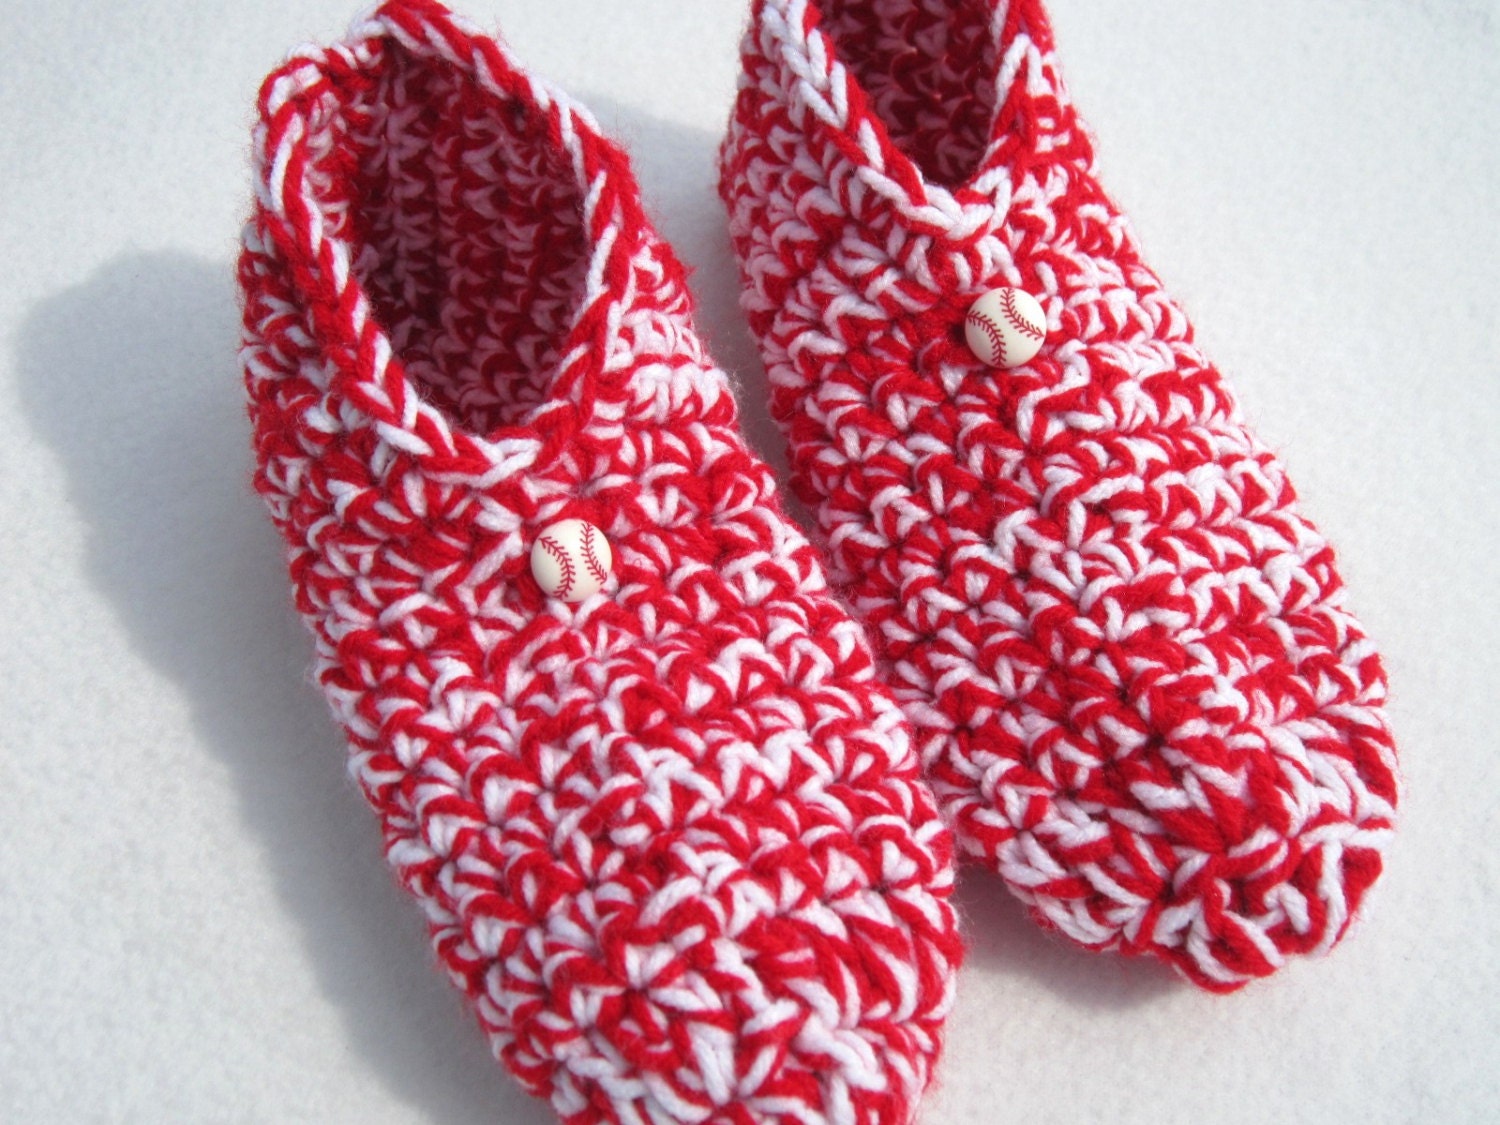 Crocheted Slippers in Red and White, Baseball Theme Houseshoes, Size Medium, Perfect for Mother's Day, St. Louis Cardinals, Red Sox Fans